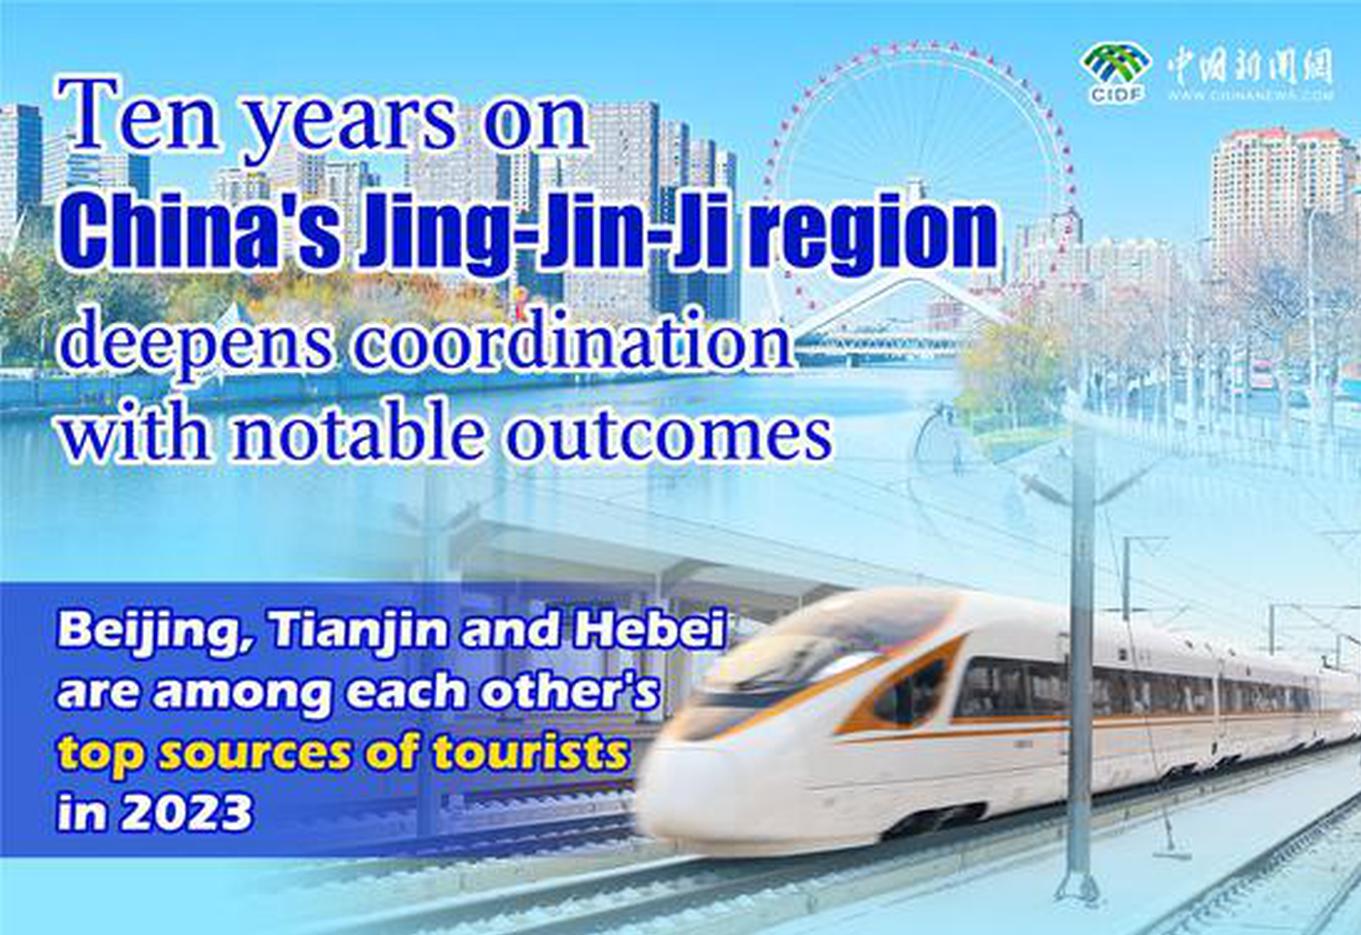 In Numbers: Ten years on China's Jing-Jin-Ji region deepens coordination with notable outcomes